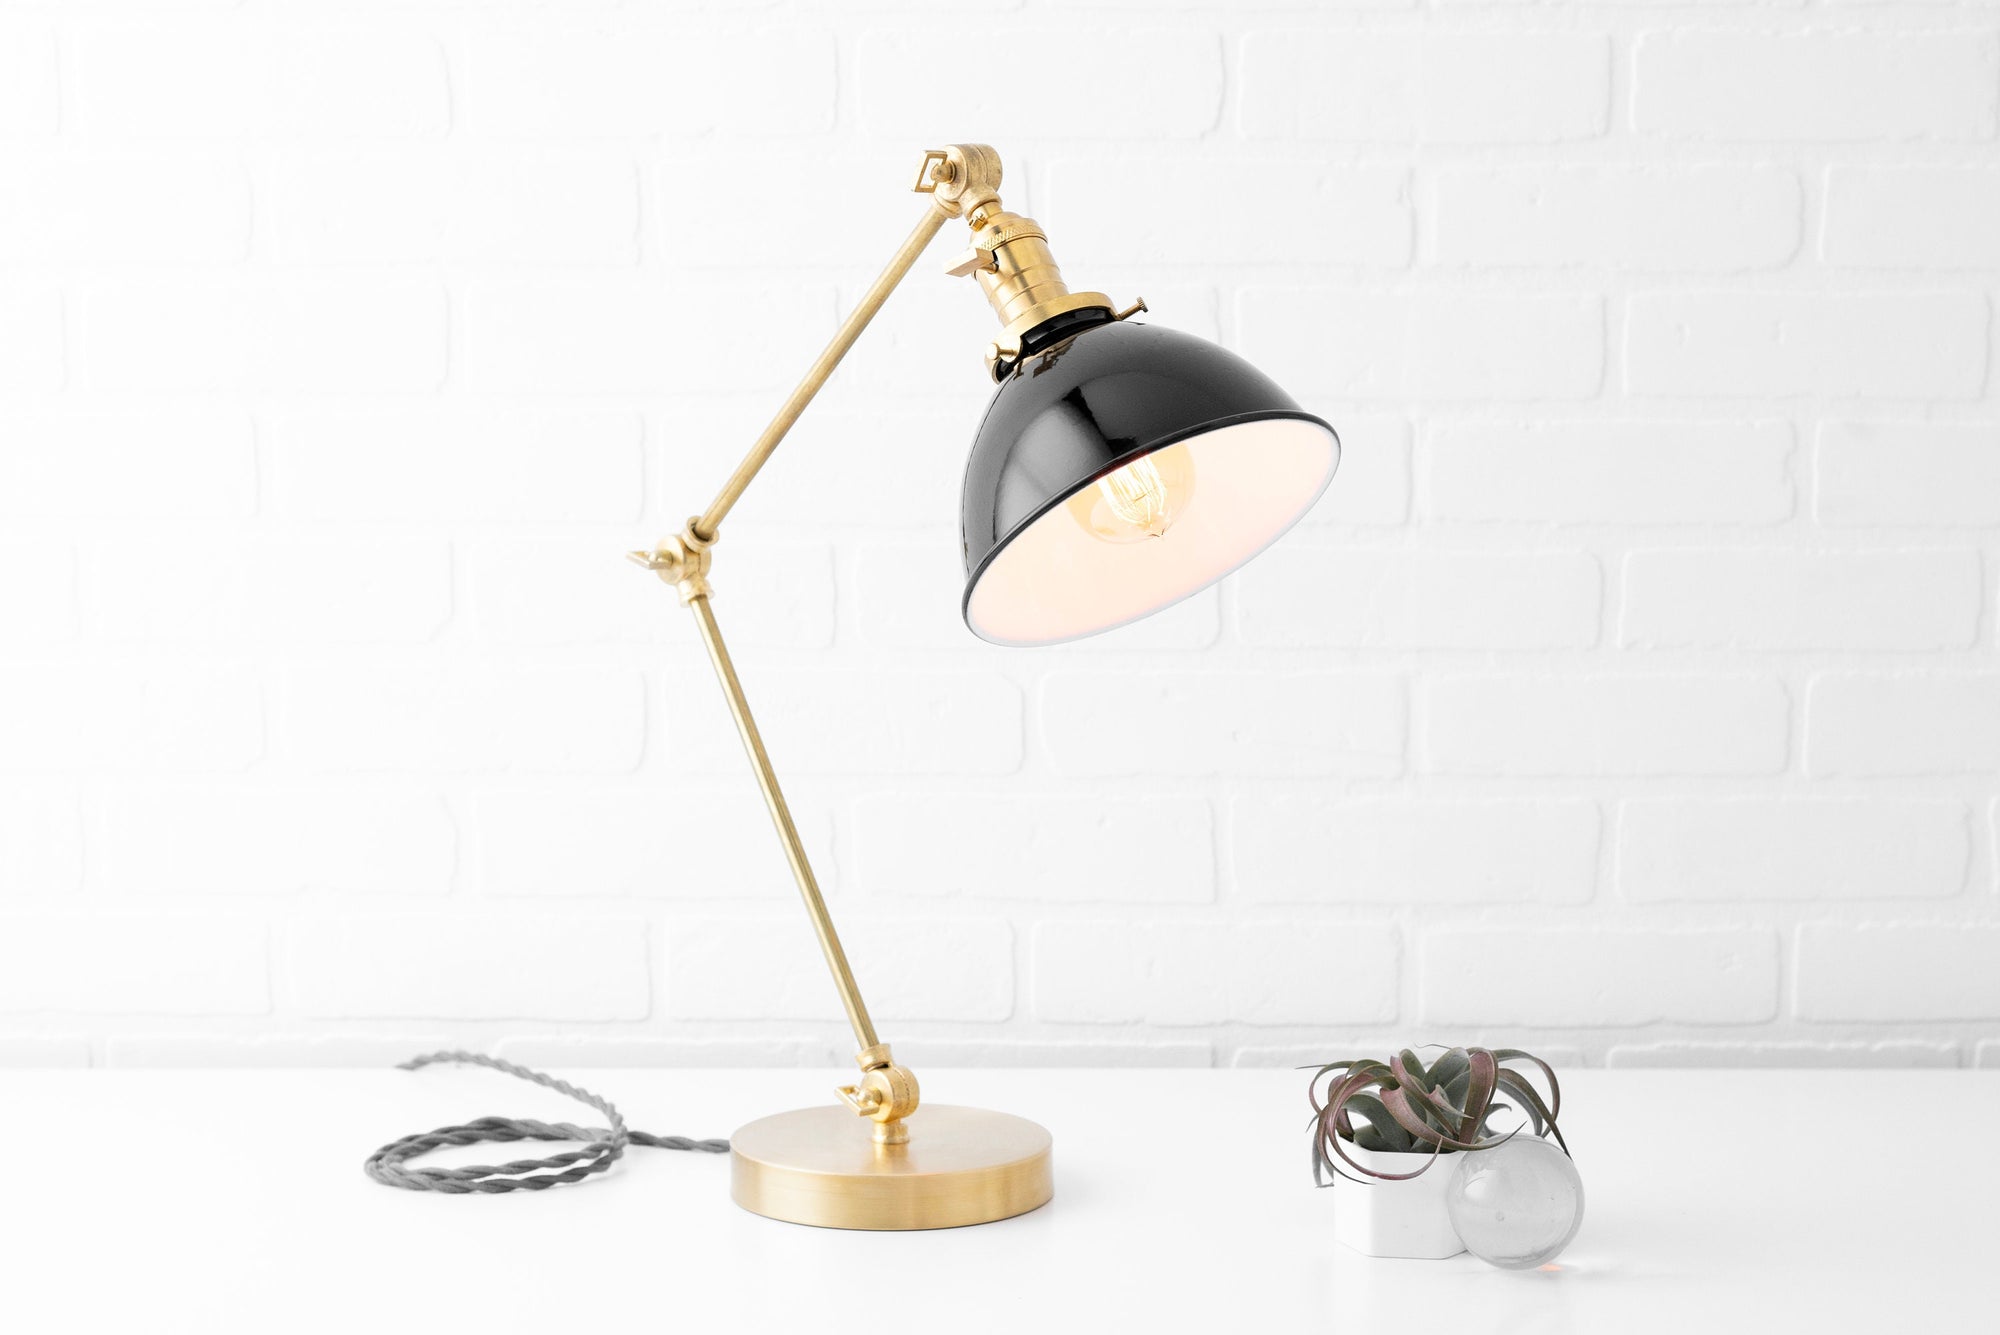 Brass Table Lamp With Black Shade